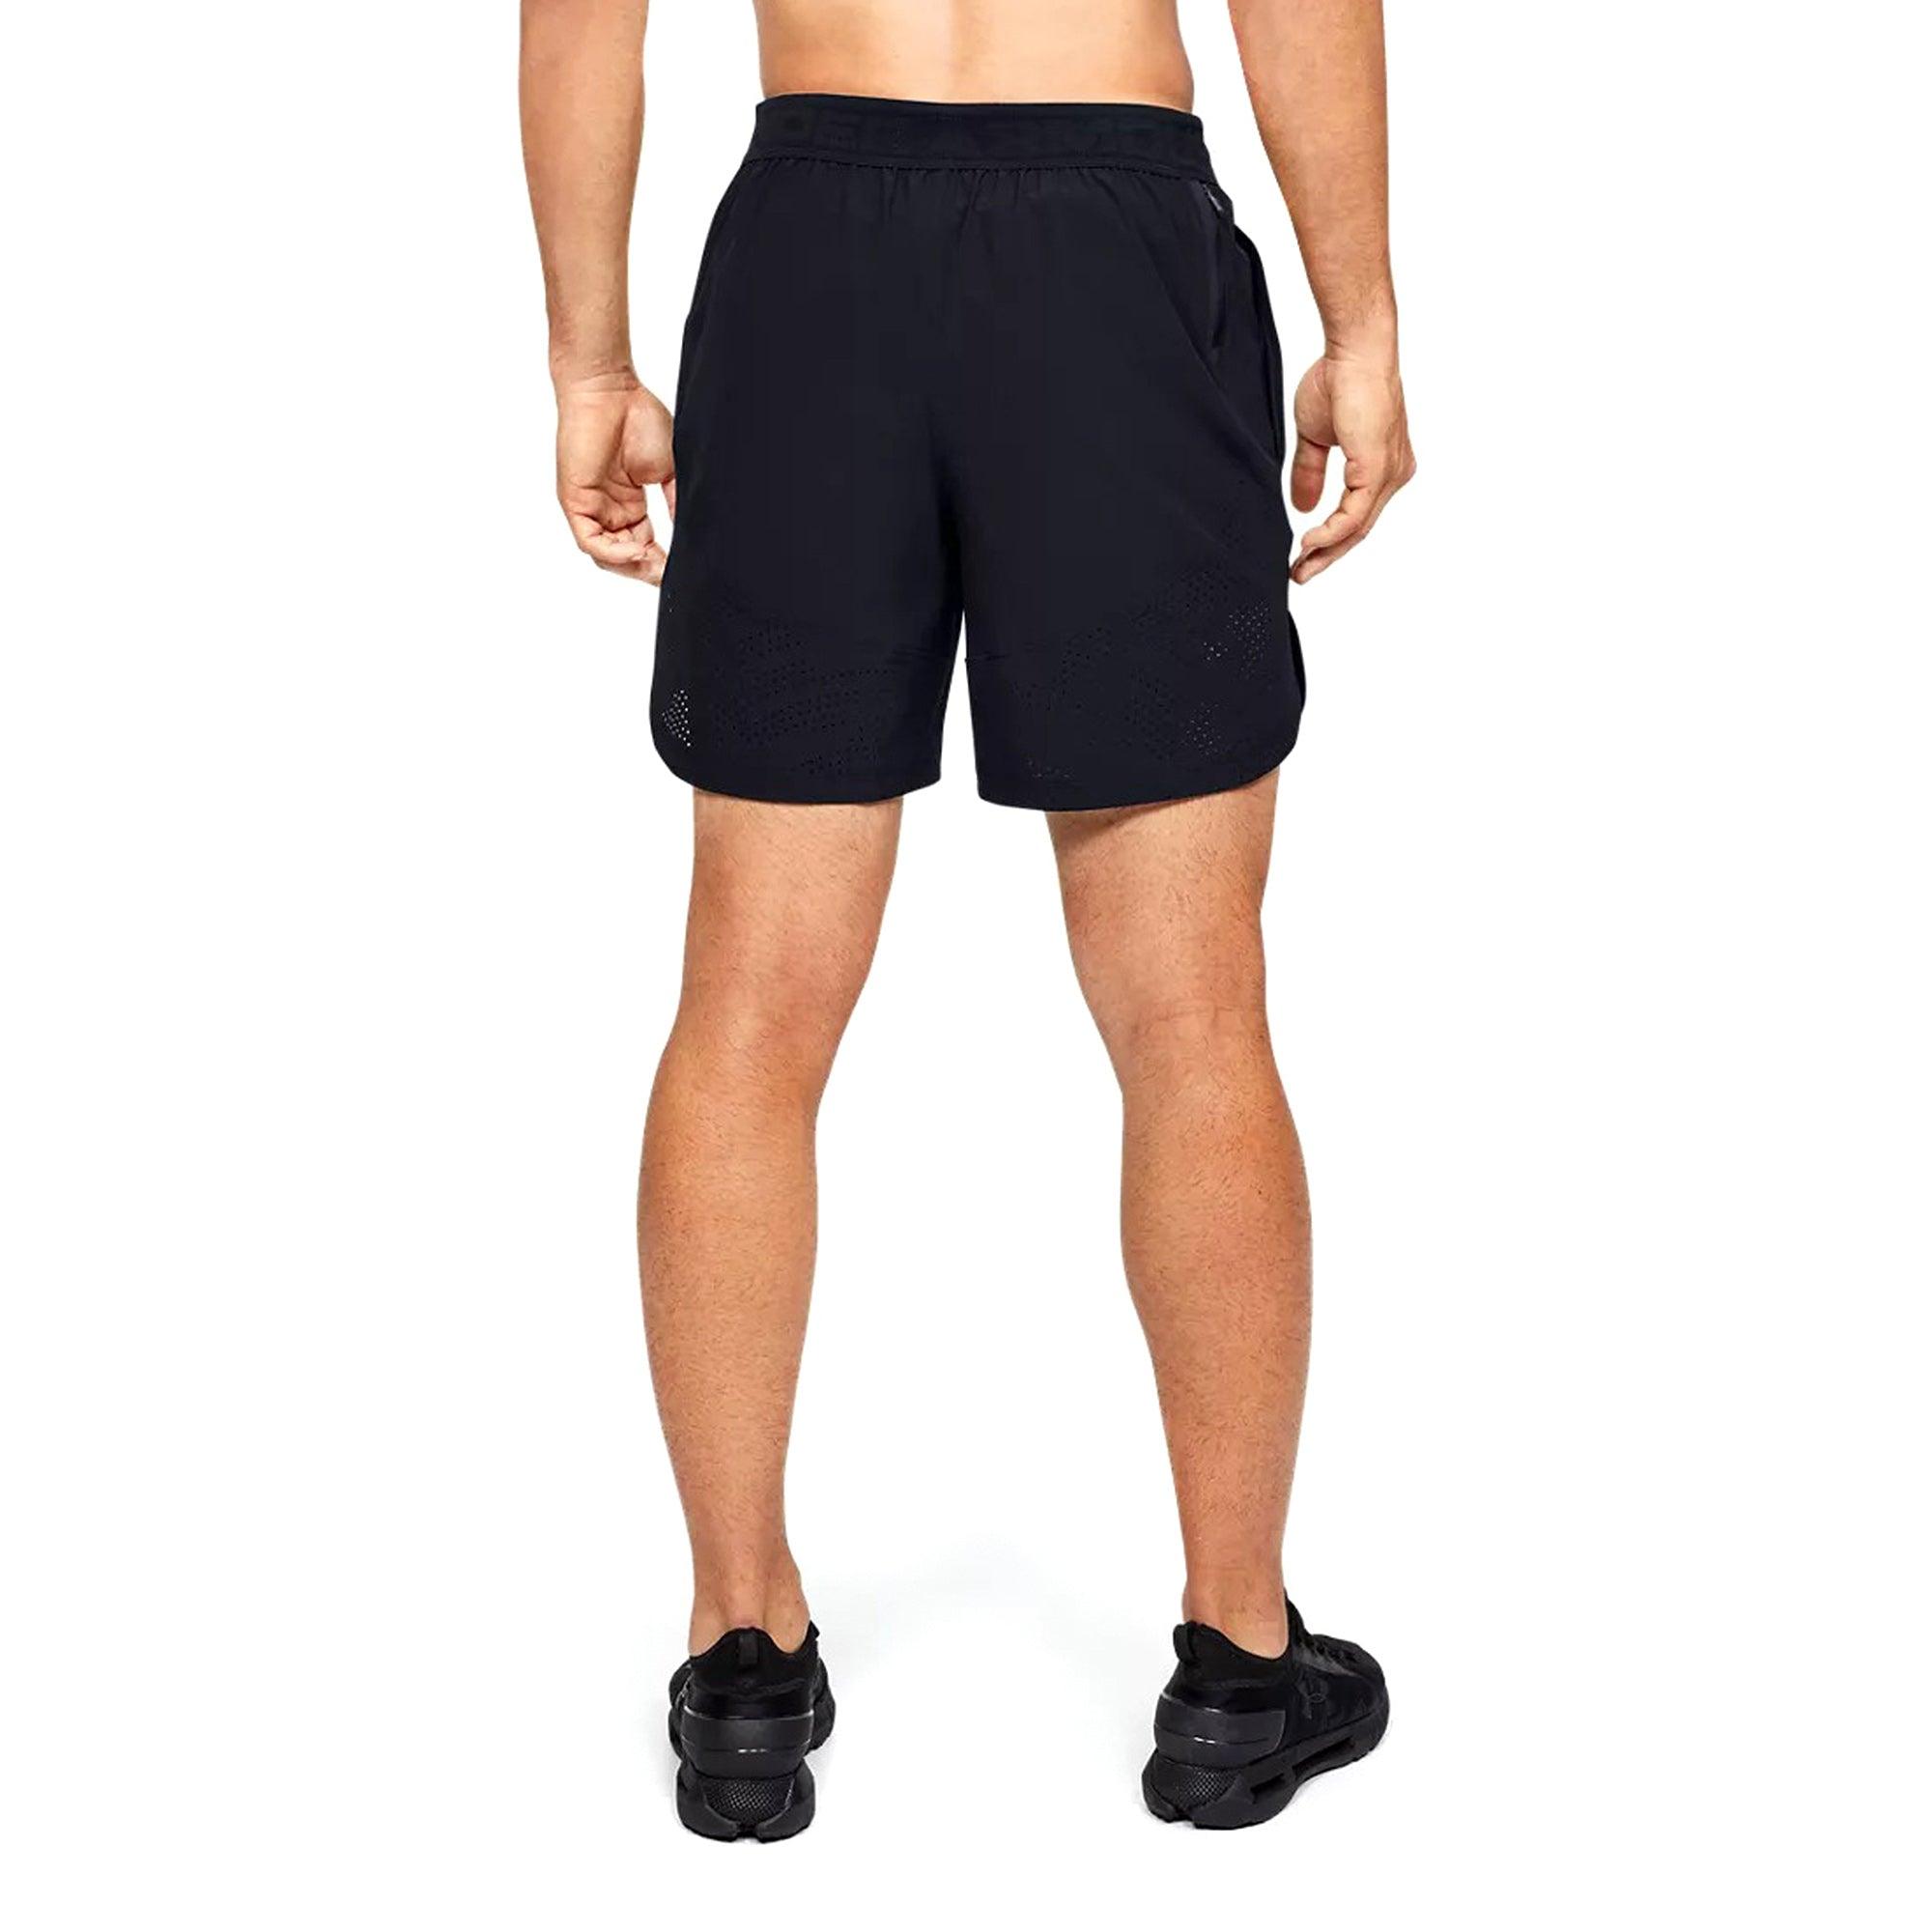 Quần ngắn thể thao nam Under Armour Stretch-Woven - 1351667-001